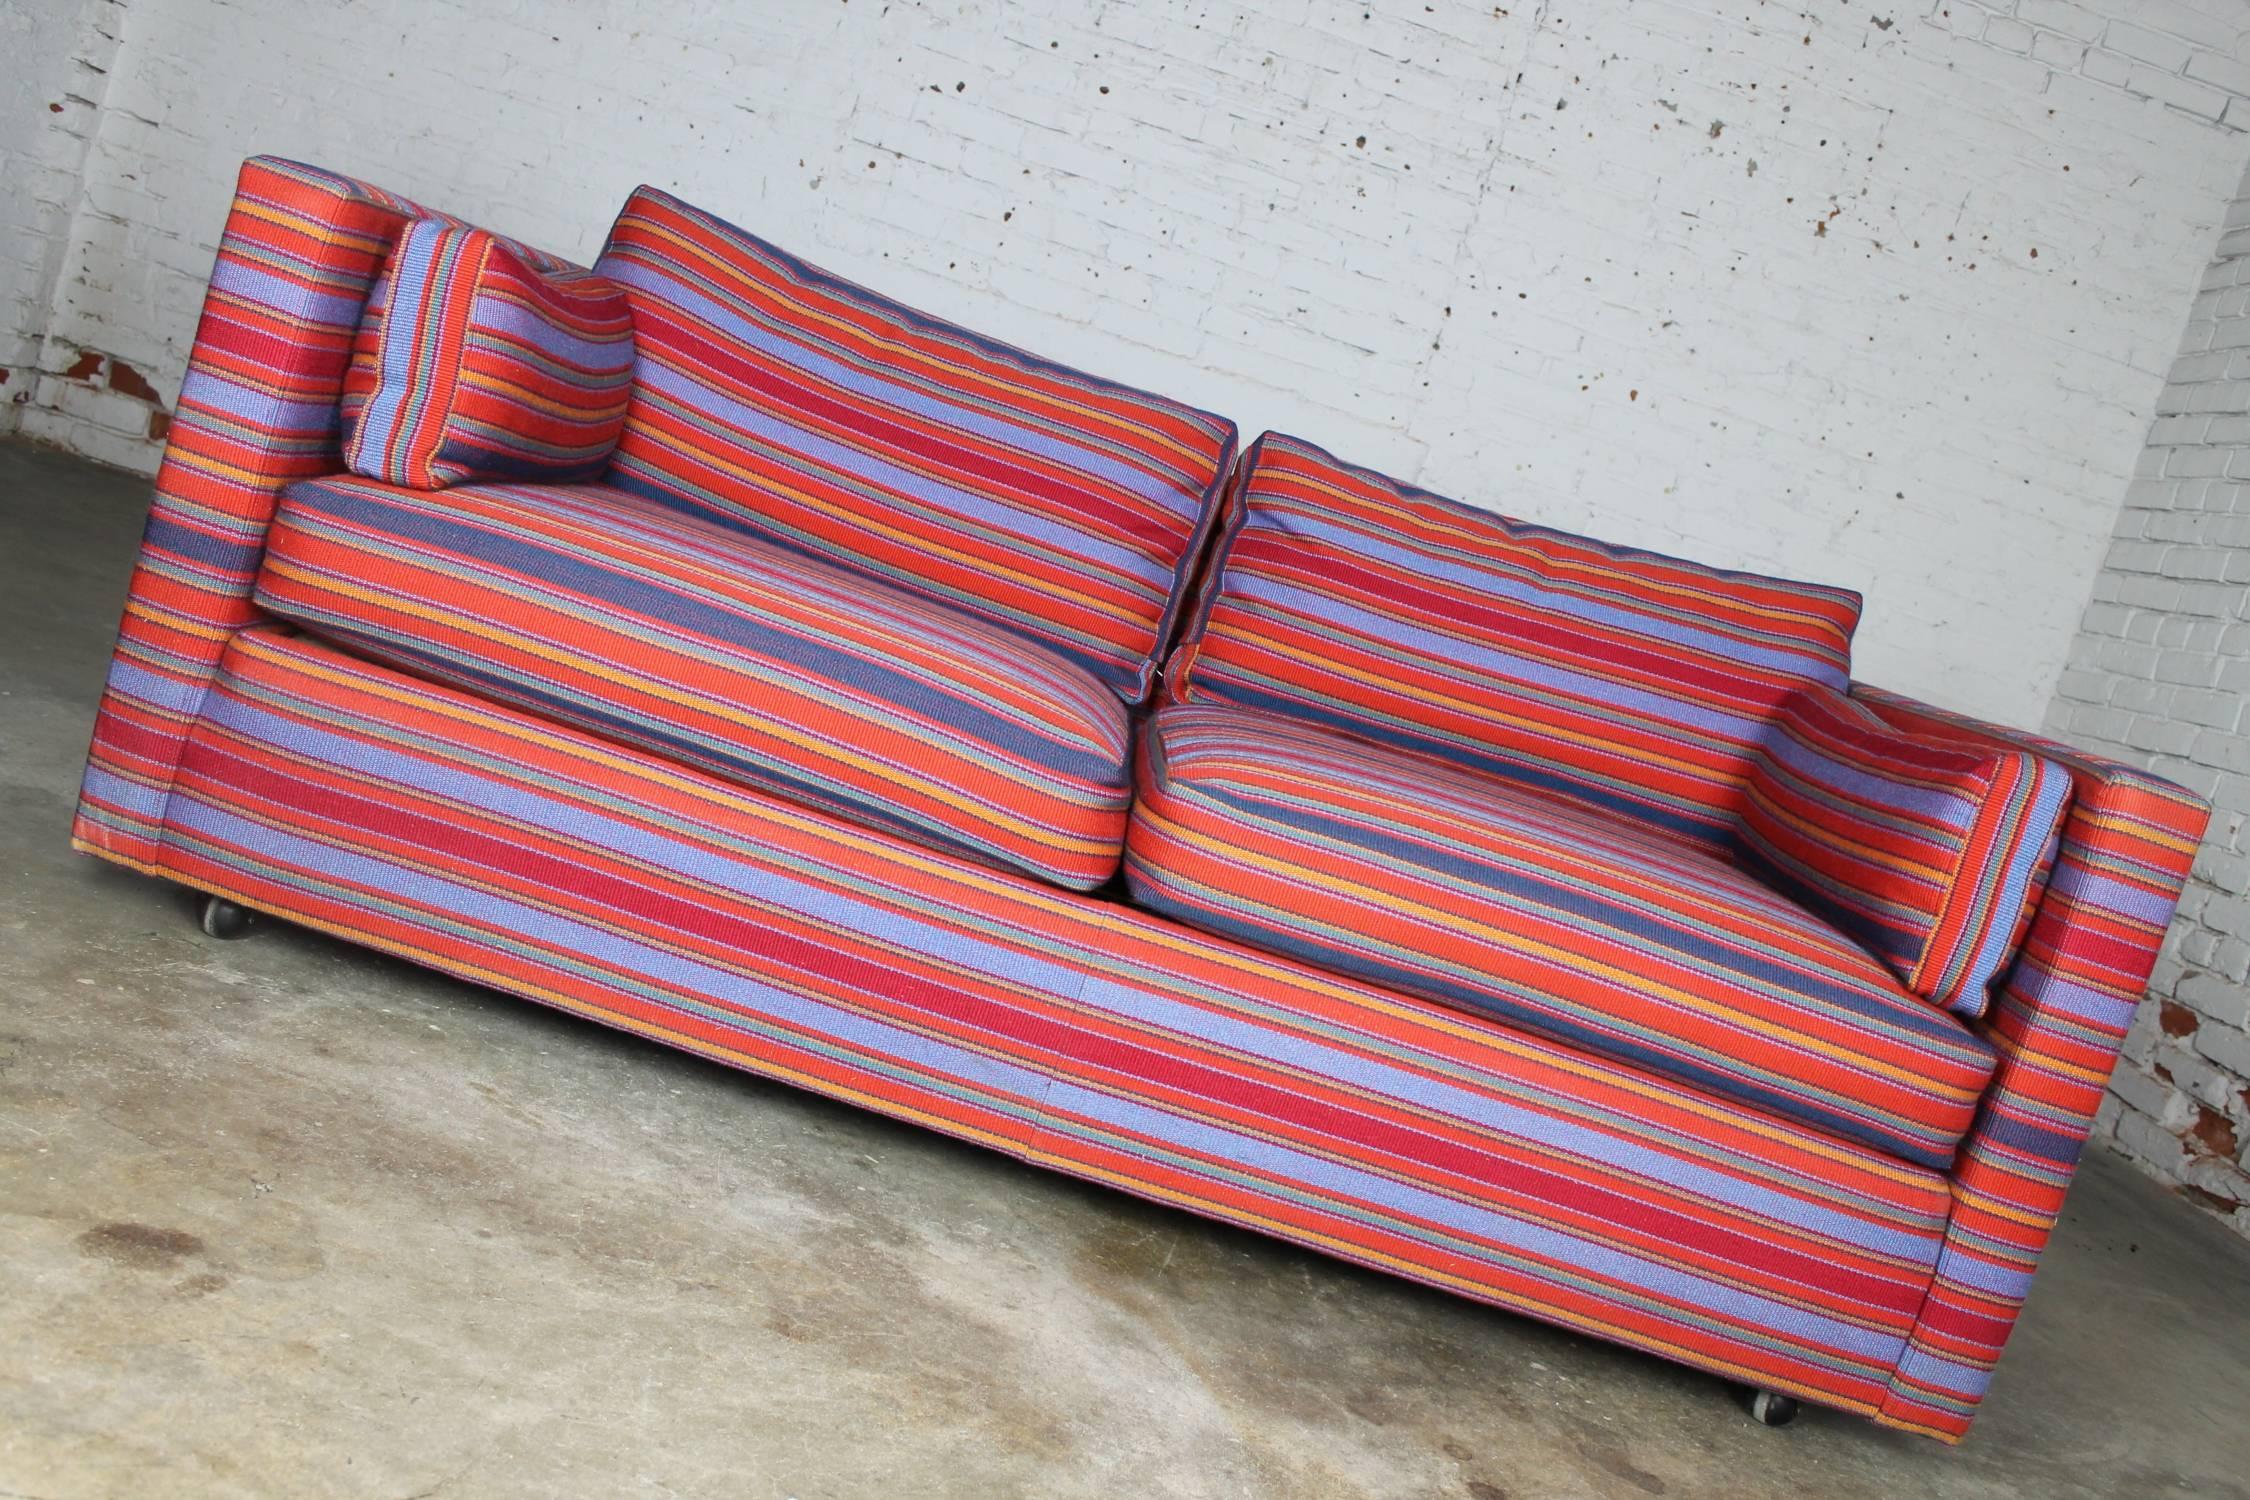 Handsome Mid-Century Modern Harvey Probber style tuxedo loveseat length sofa in striped Jack Lenor Larson style fabric. It is in wonderful vintage condition. The fabric looks like new.

This is such an awesome sofa in a fabulous fabric and a great